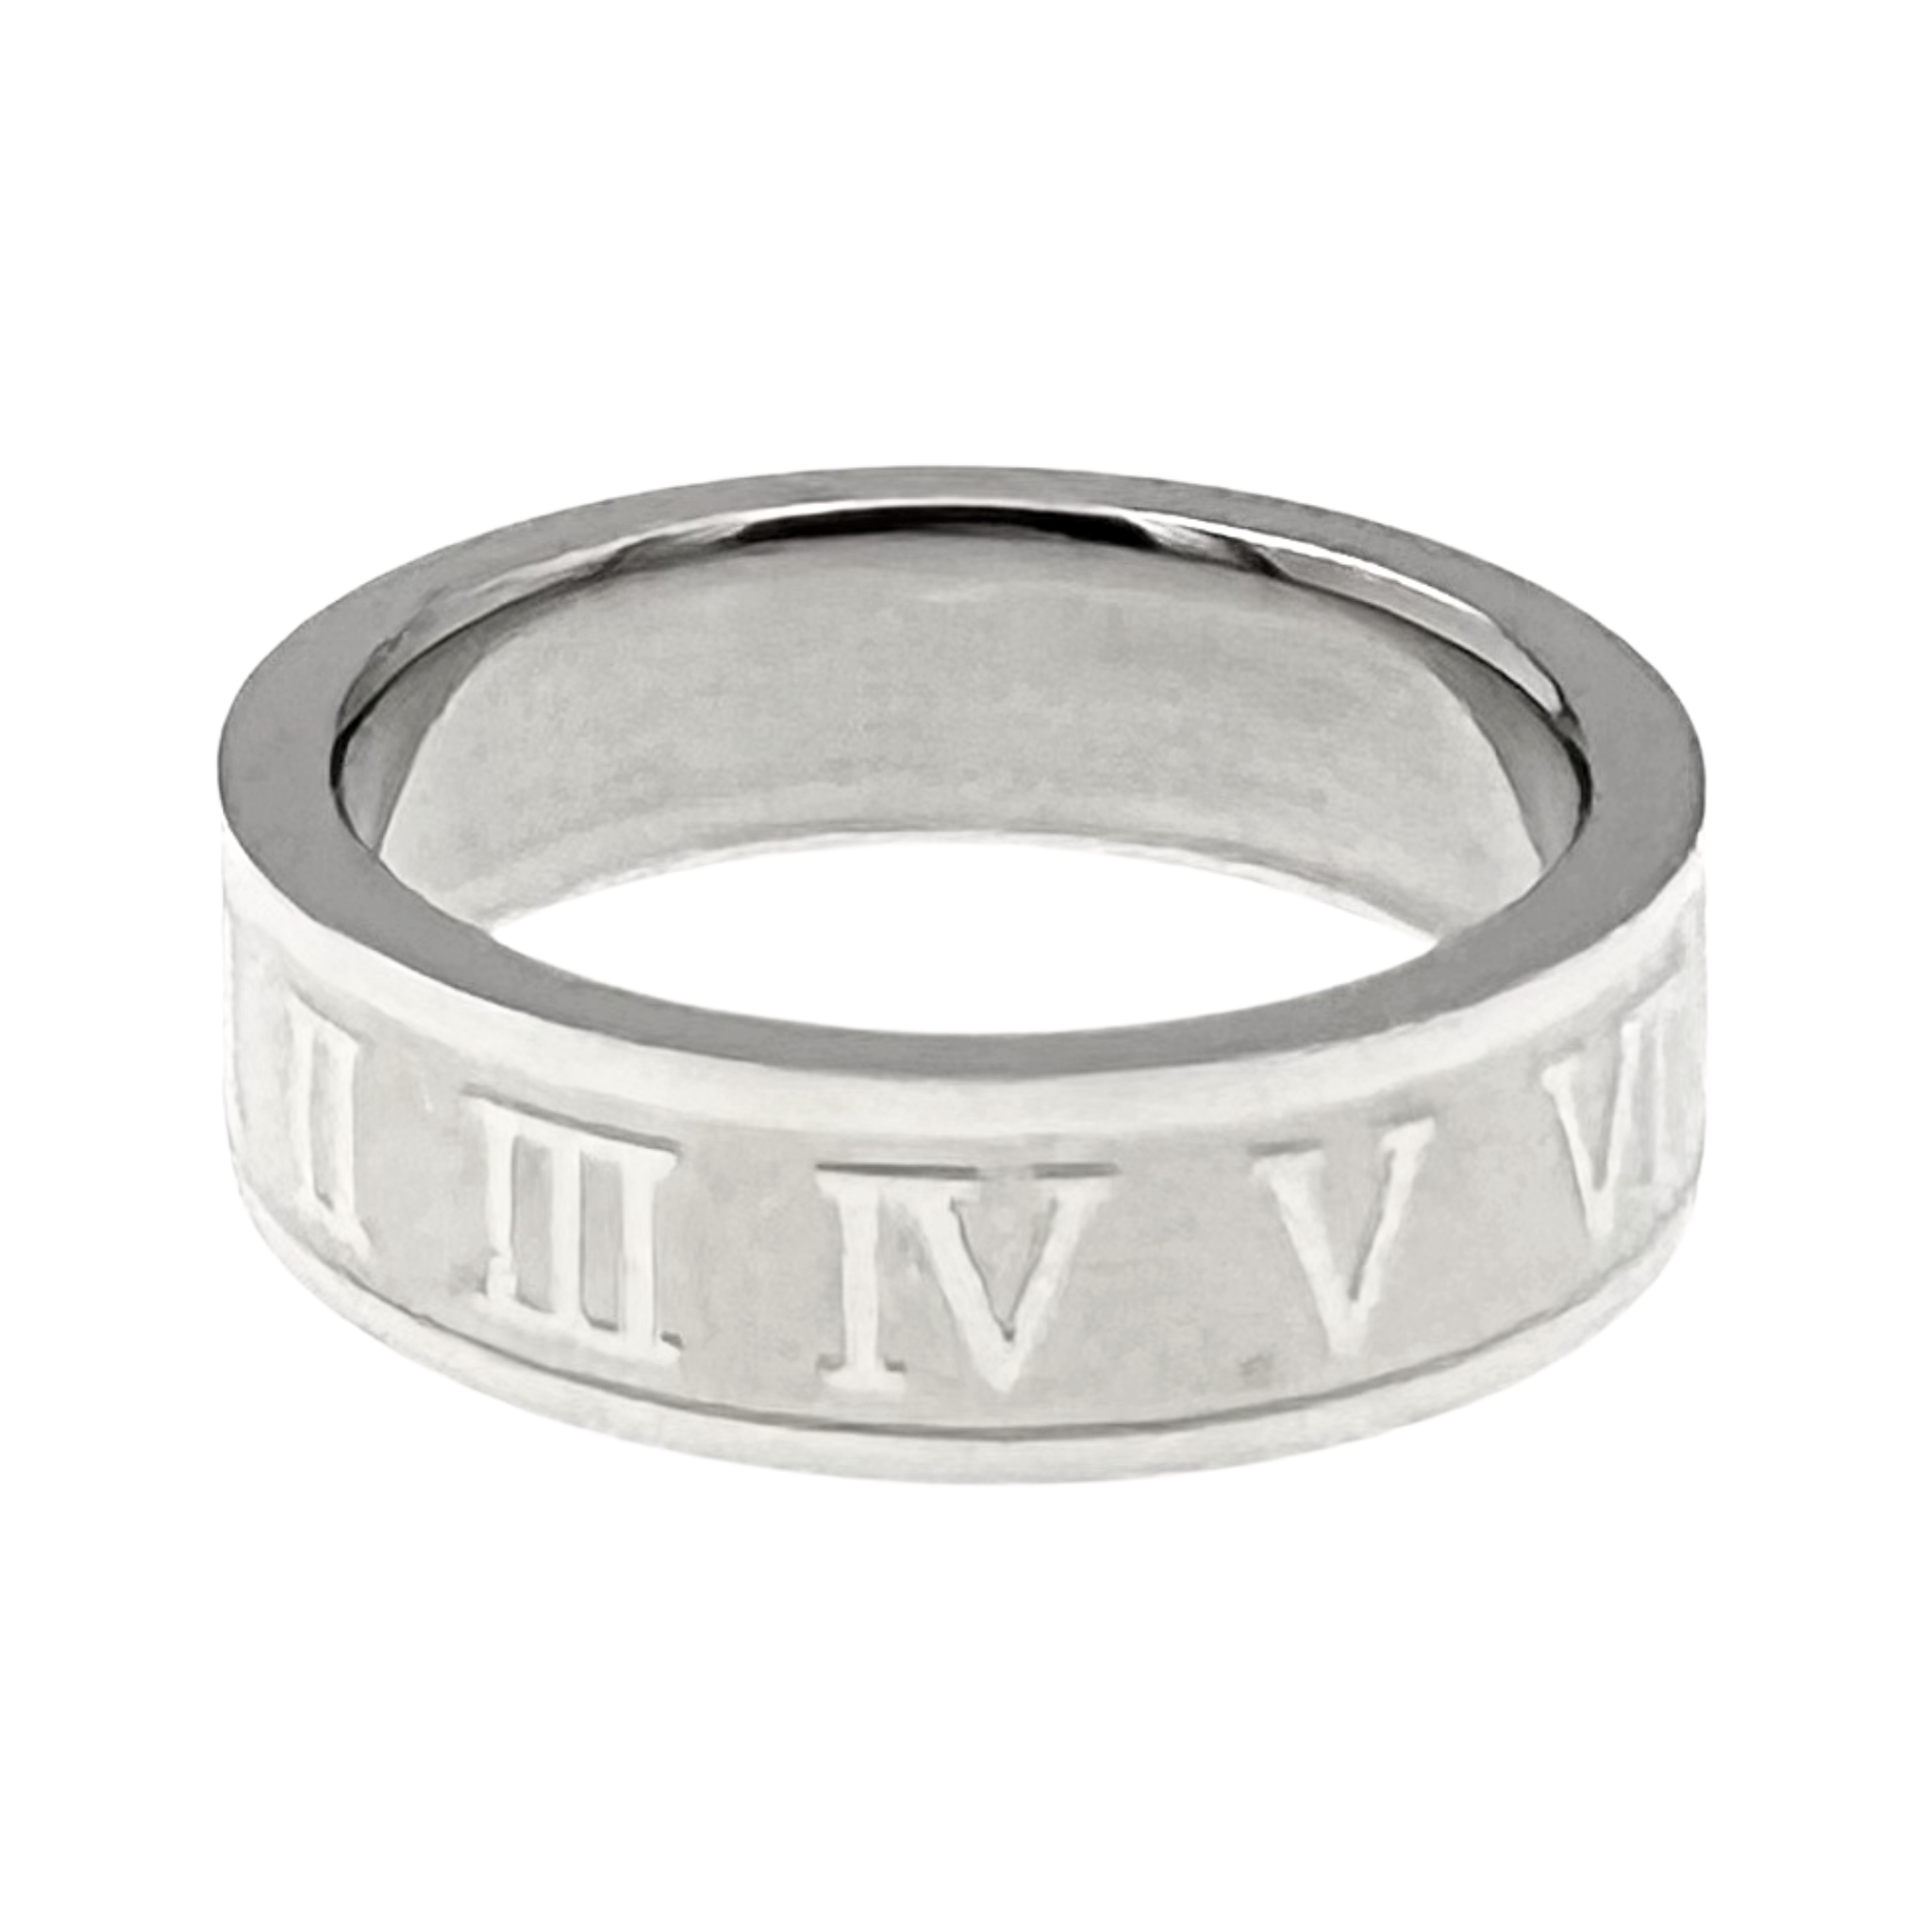 Roman Numeral Ring (10mm) | Personalized Jewelry